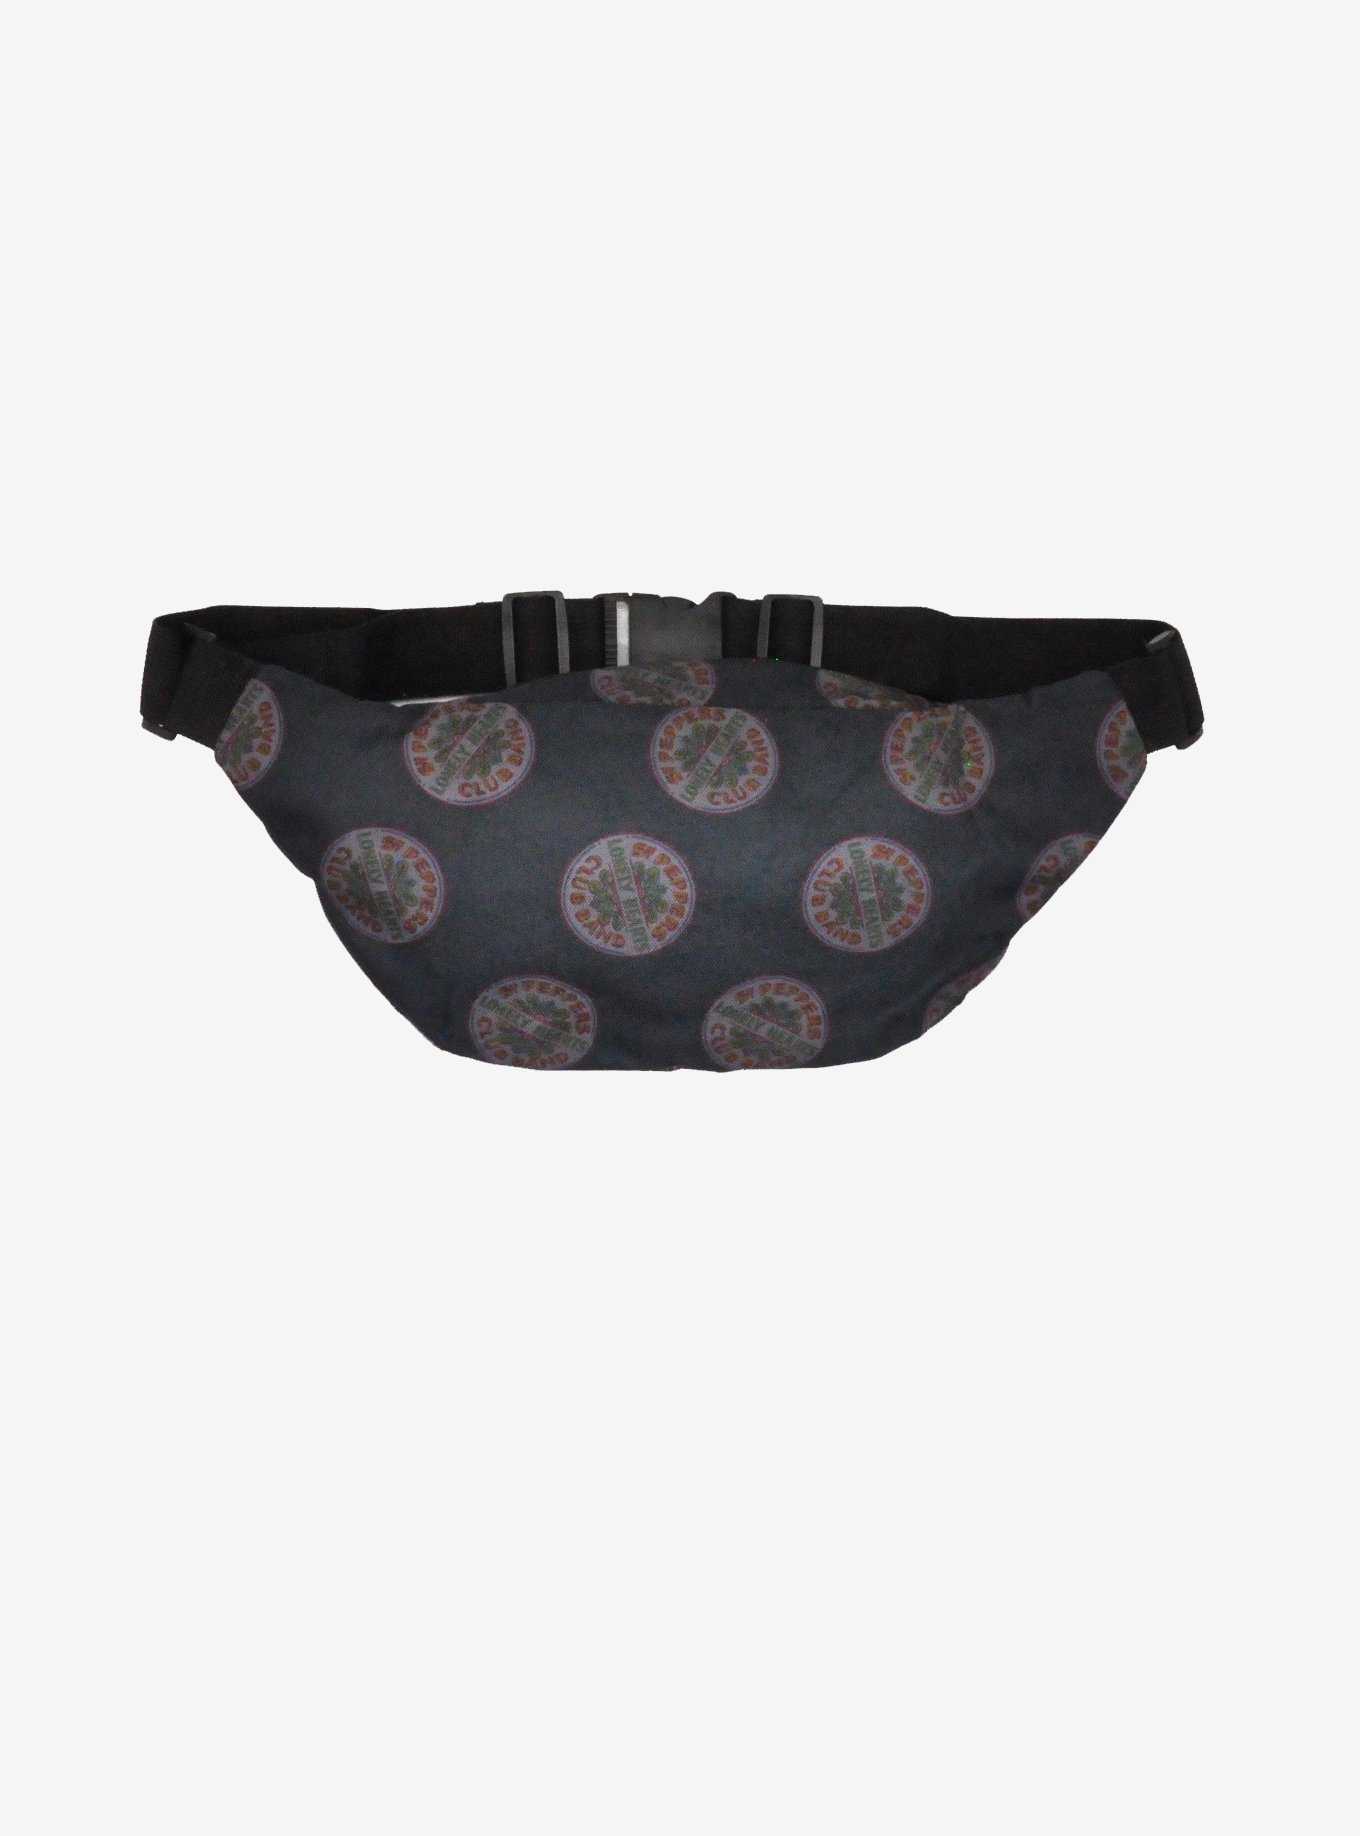 Rocksax The Beatles Sgt. Peppers Fanny Pack, , hi-res